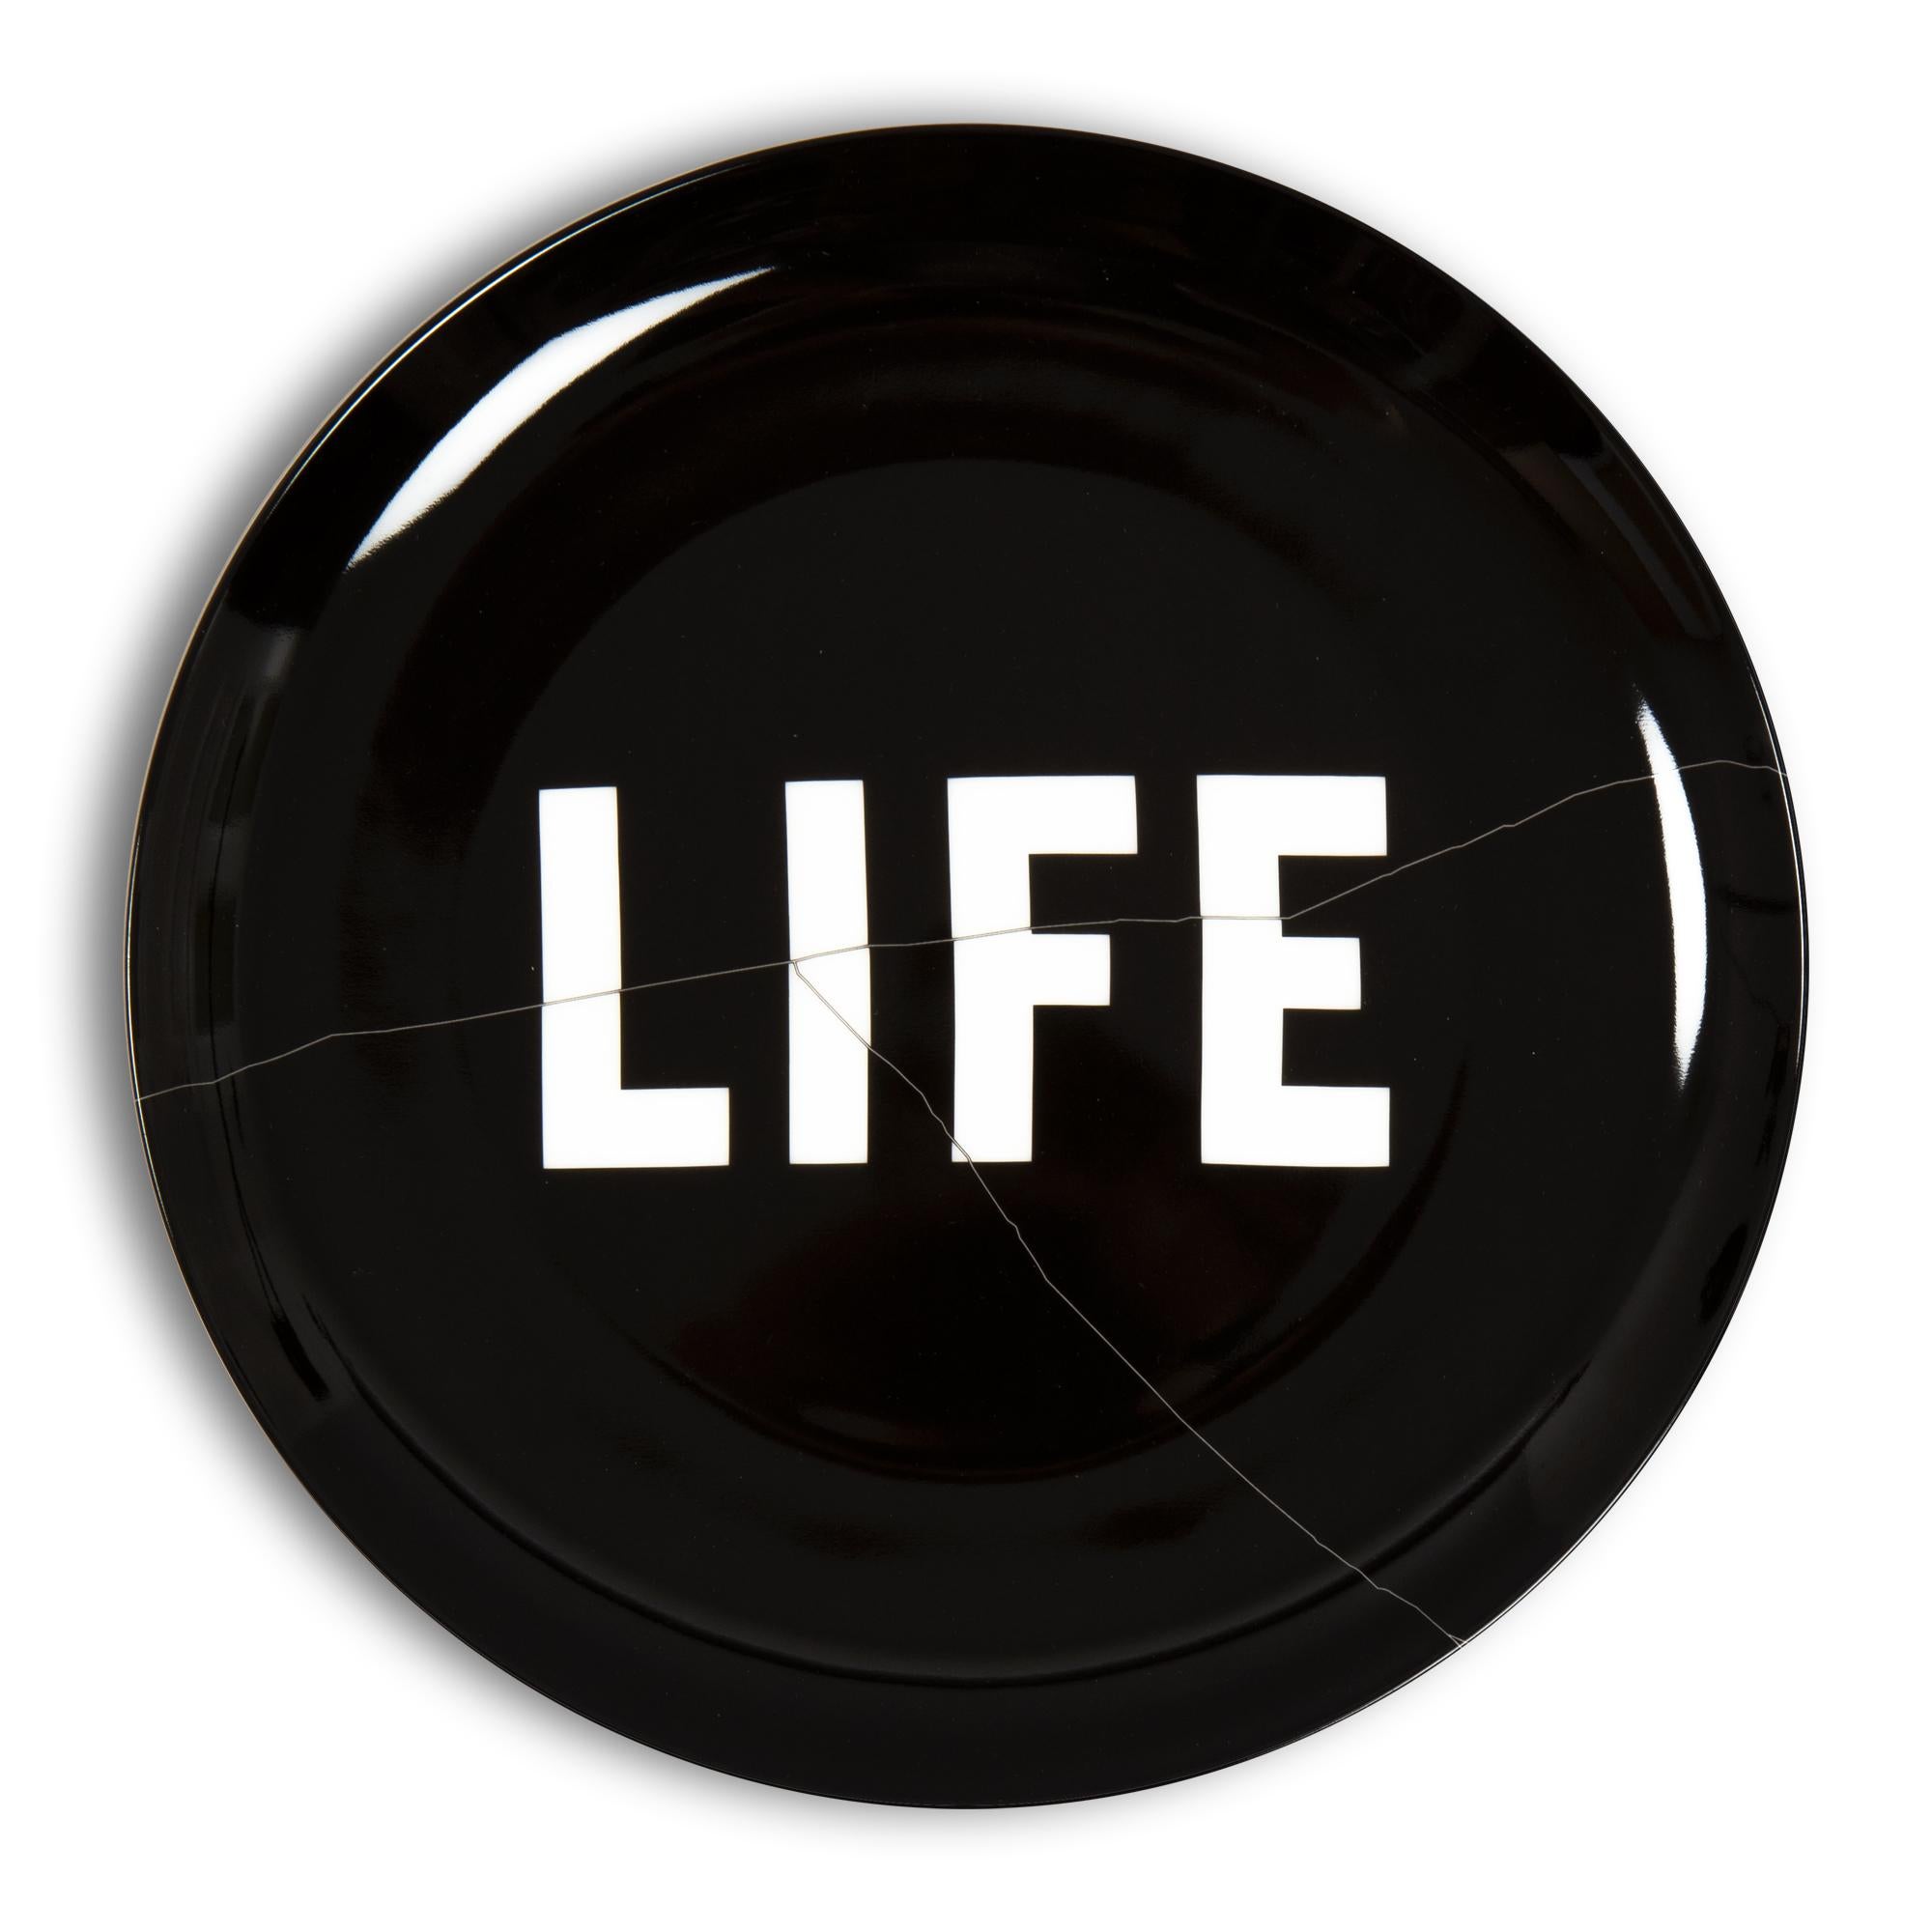 Virgil Abloh (American, 1980-2021)
Life Itself, 2022
Medium: Porcelain plate (fine bone china)
Dimensions: 10 1/2 in diameter  26.7 cm diameter
Edition of 250: Printed signature and edition details on verso
Condition: Mint (in original presentation